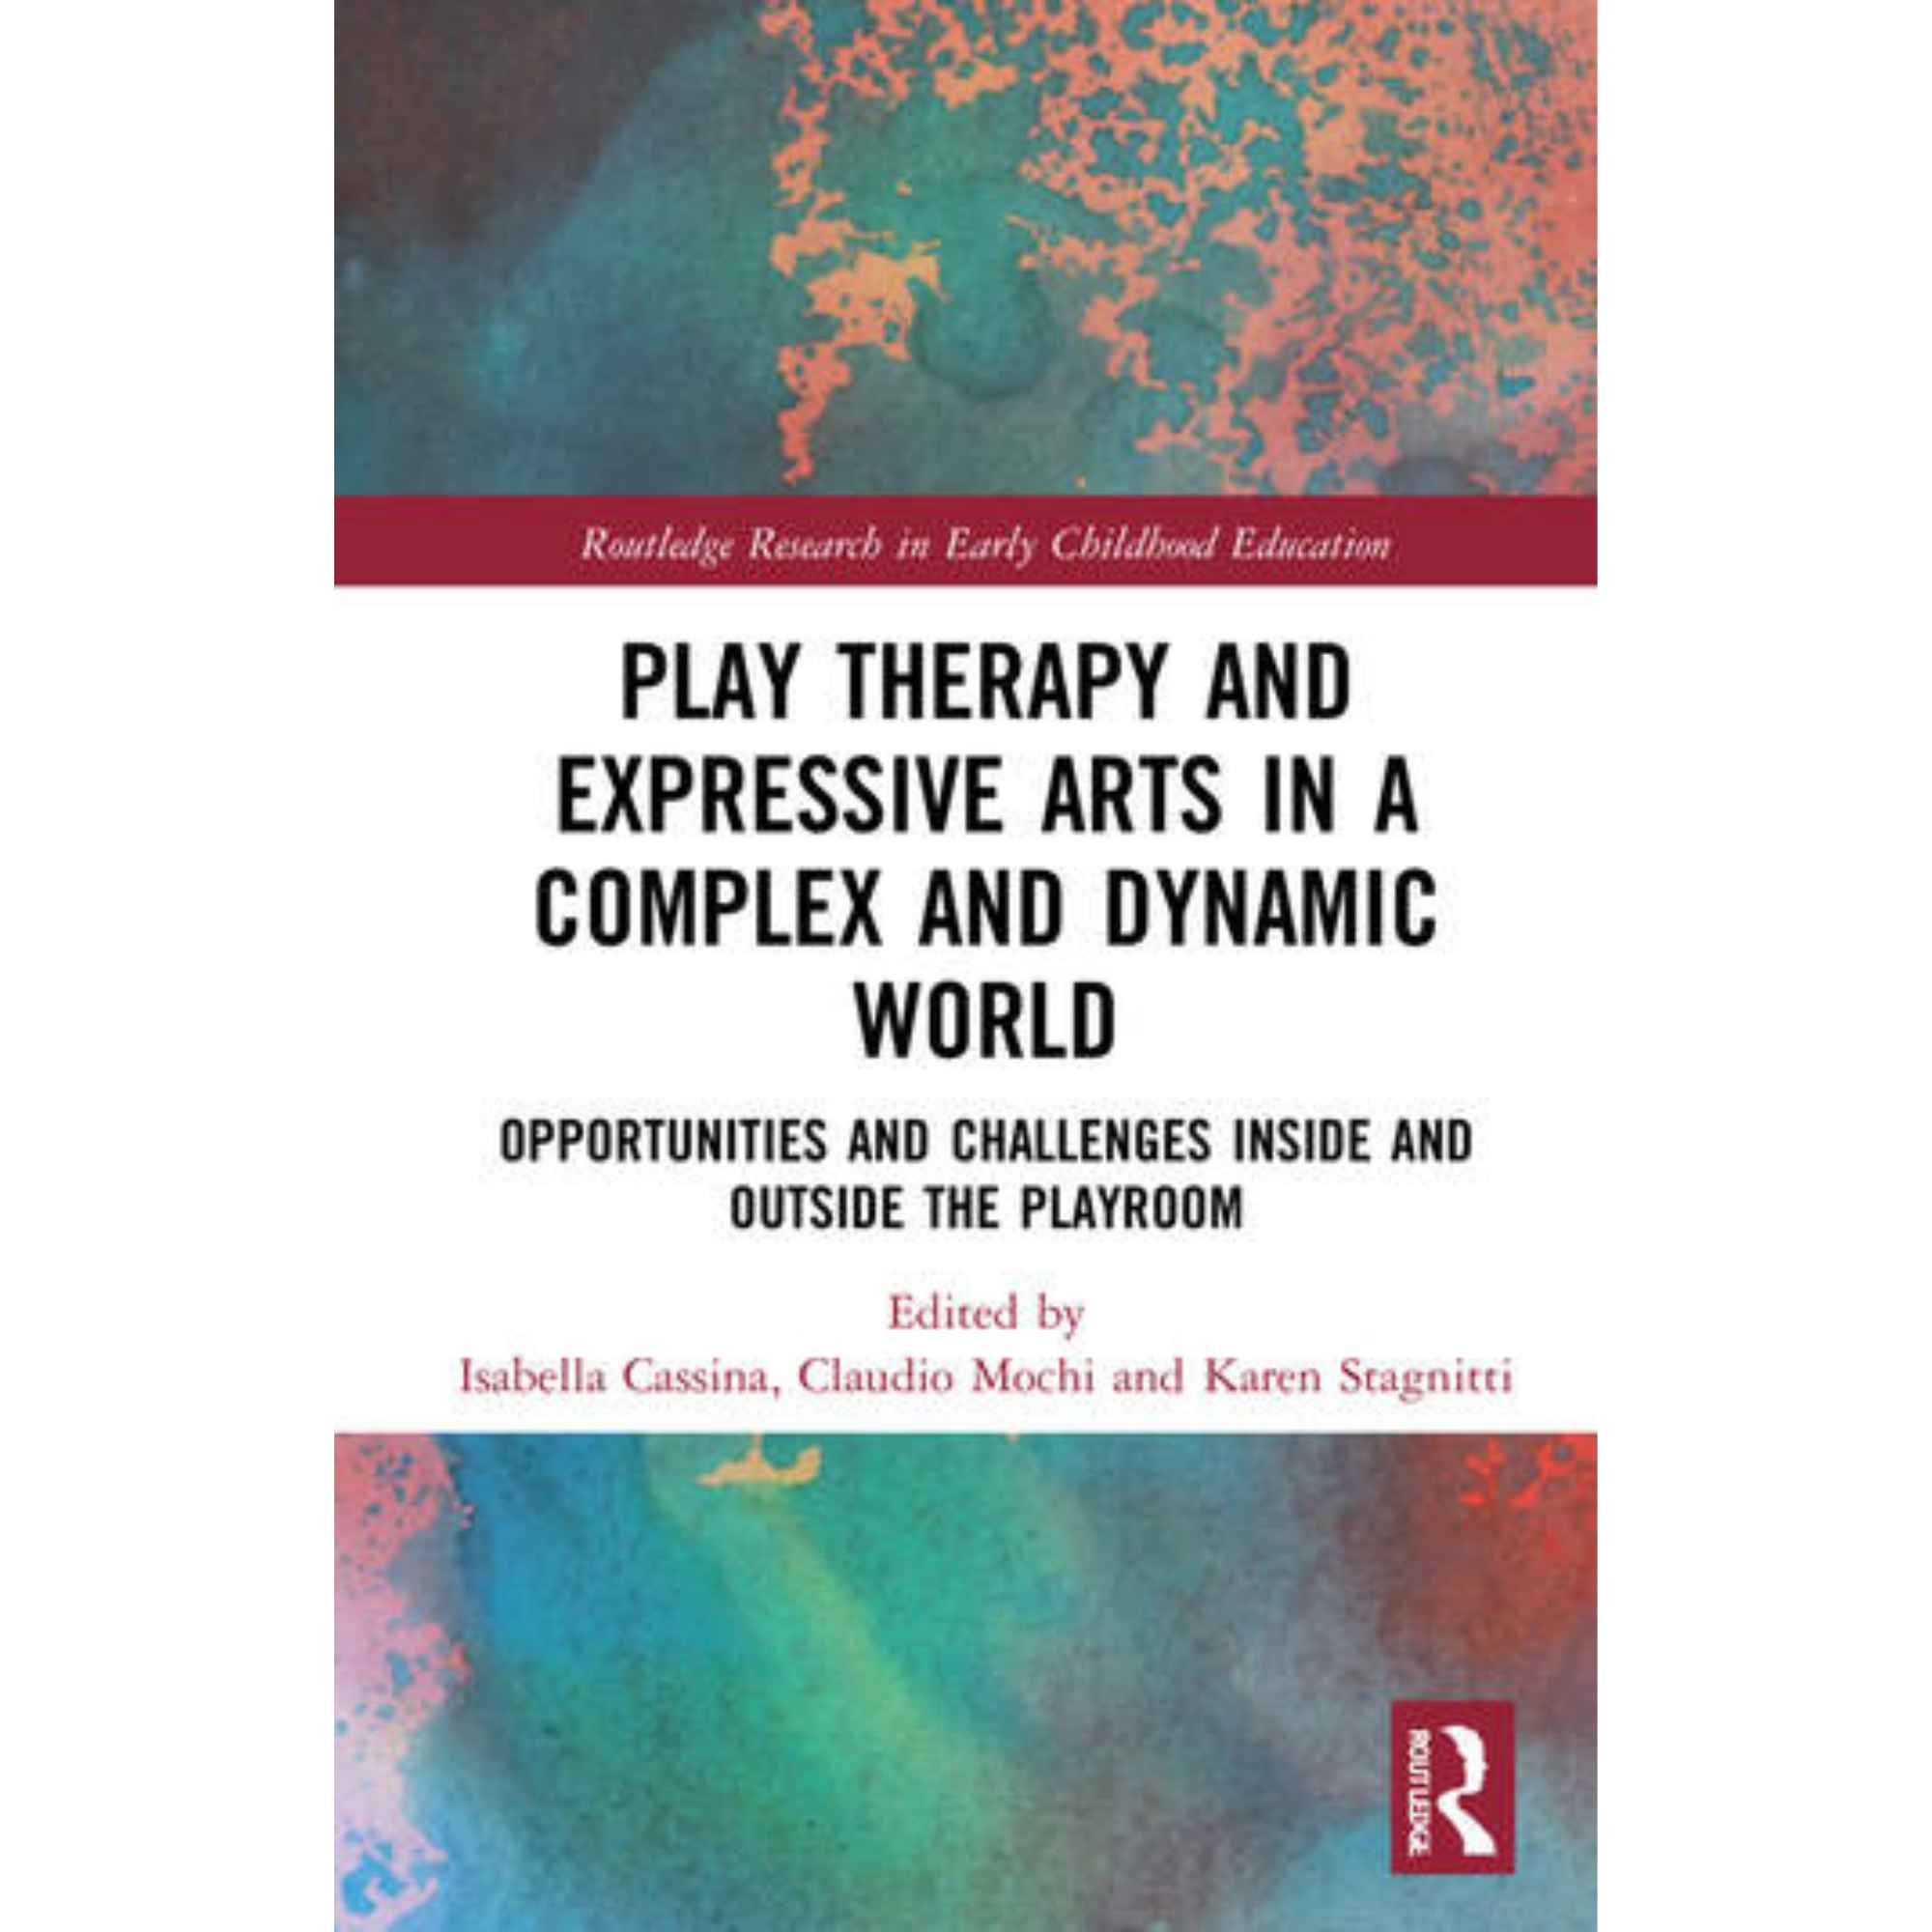 book play therapy and expressive arts